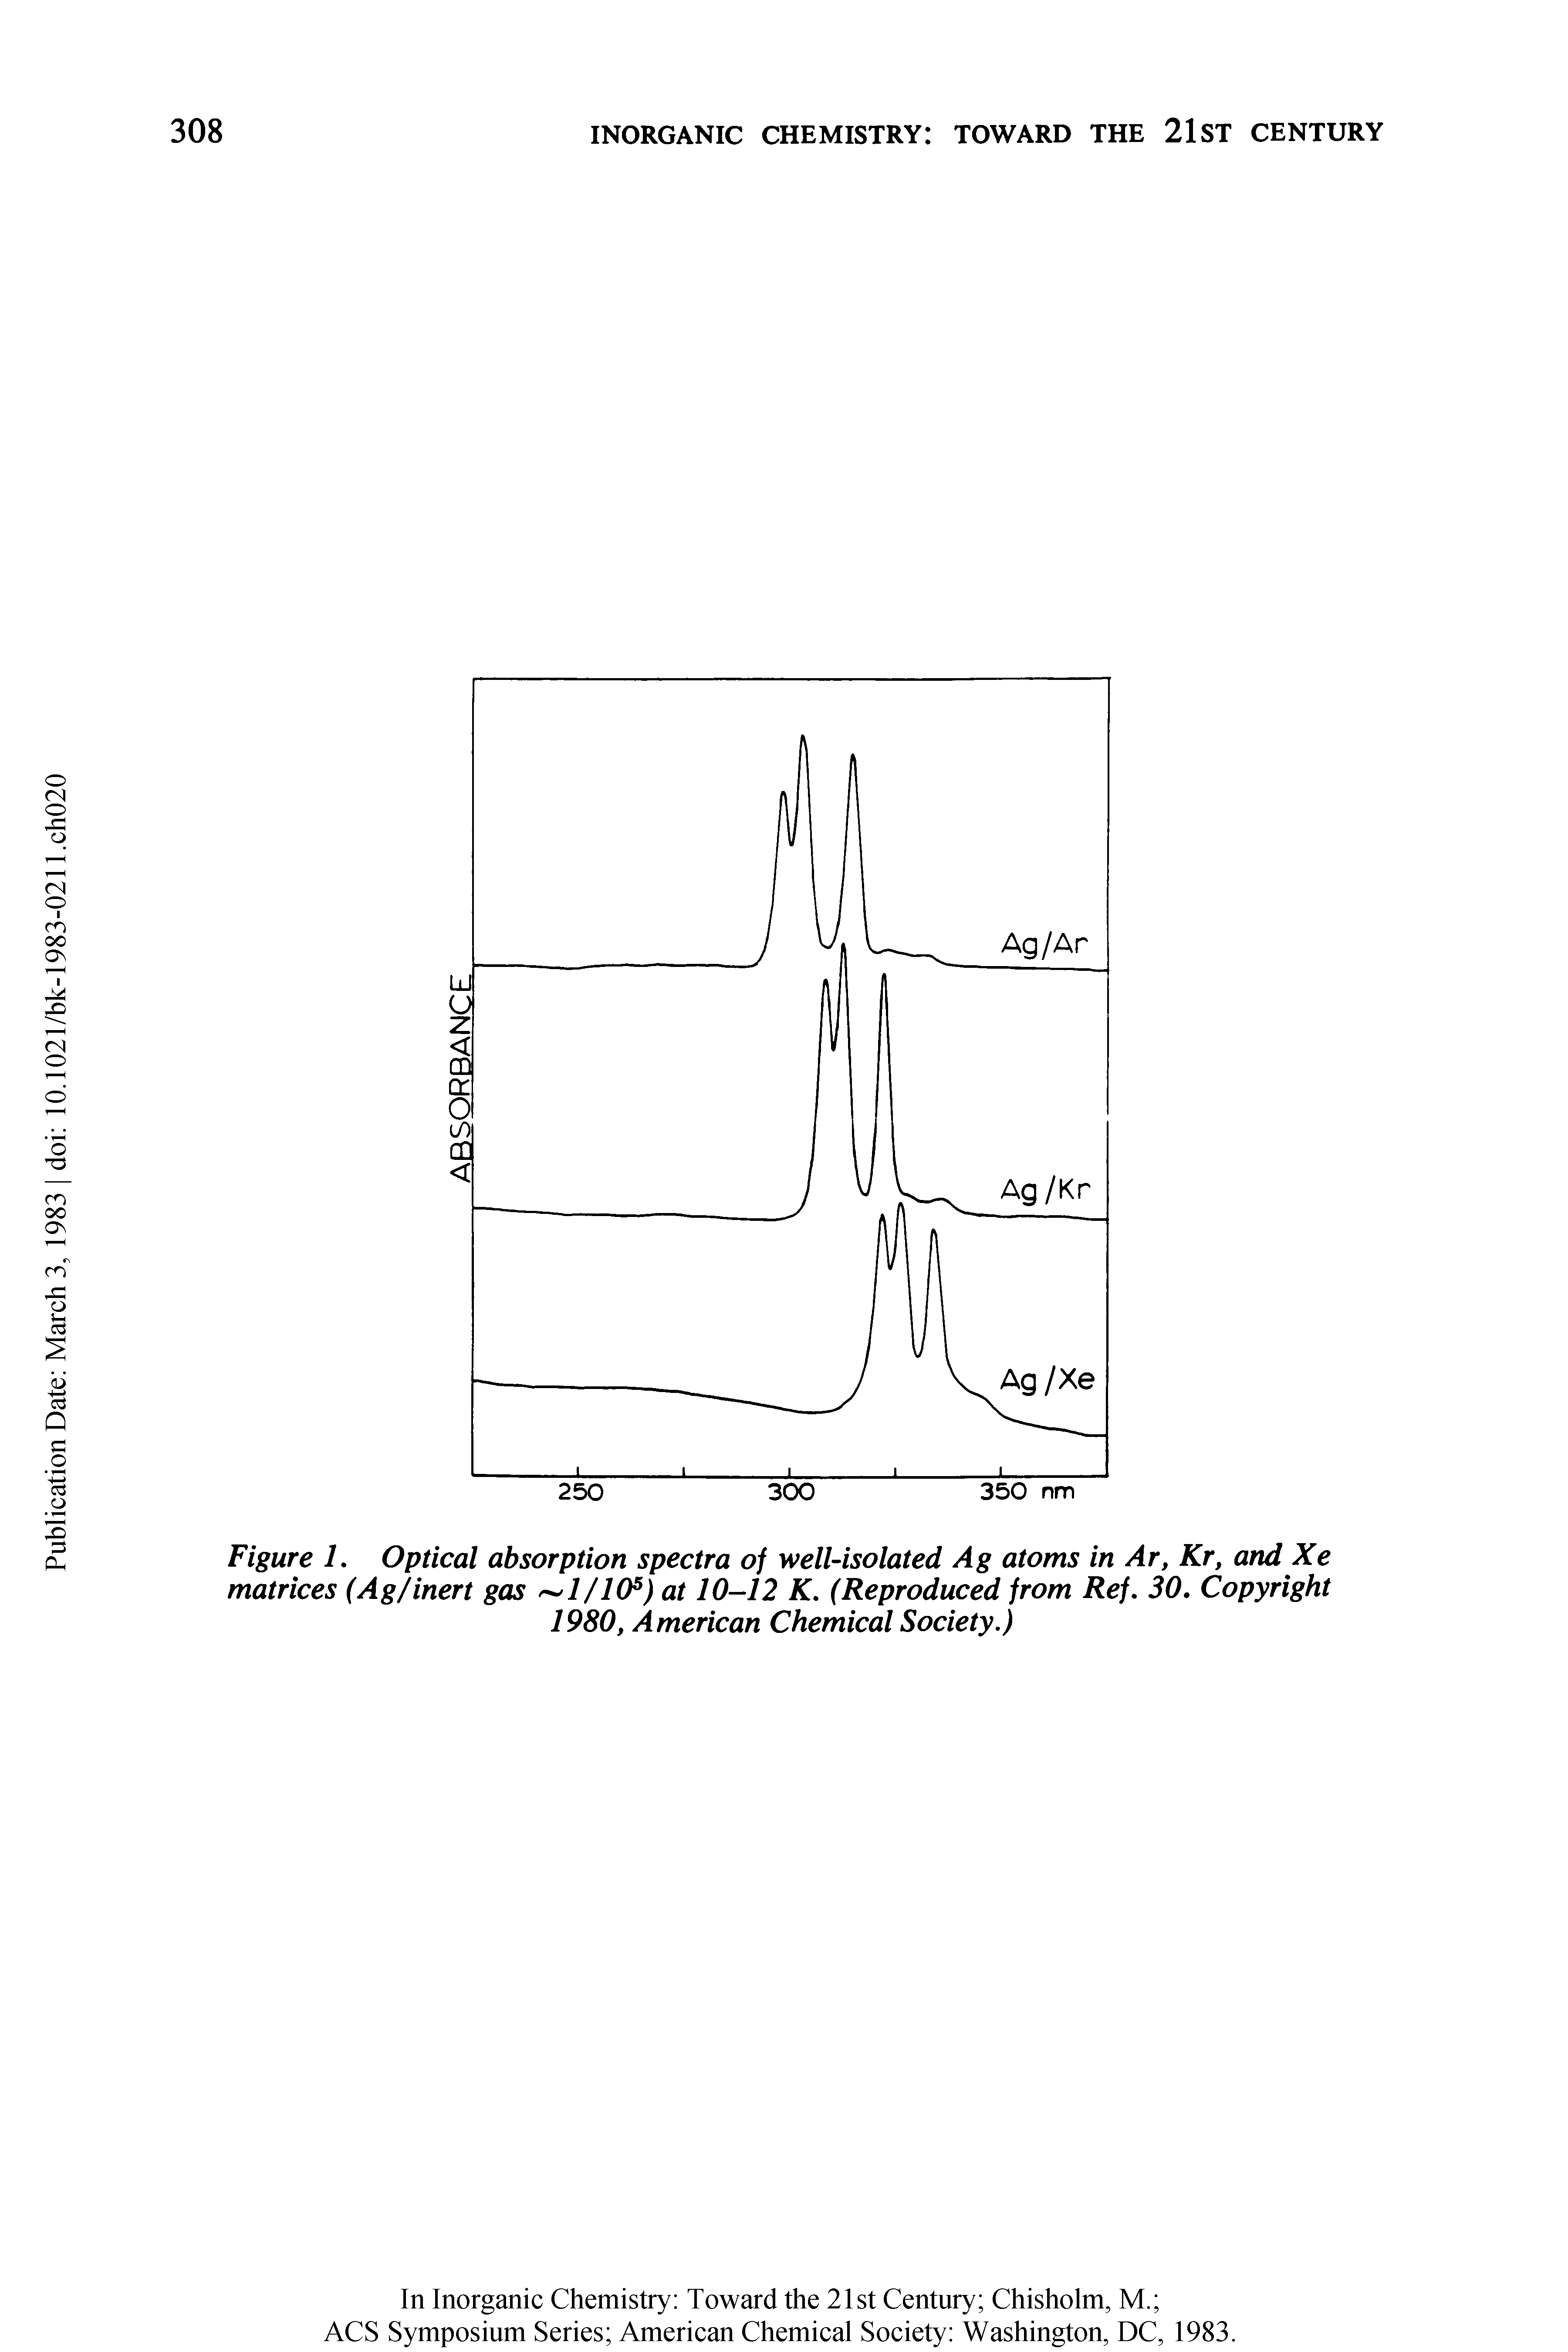 Figure L Optical absorption spectra of well-isolated Ag atoms in Ar, Kr, and Xe matrices (Ag/inert gas 1/105) at 10-12 K. (Reproduced from Ref. 30. Copyright 1980, American Chemical Society.)...